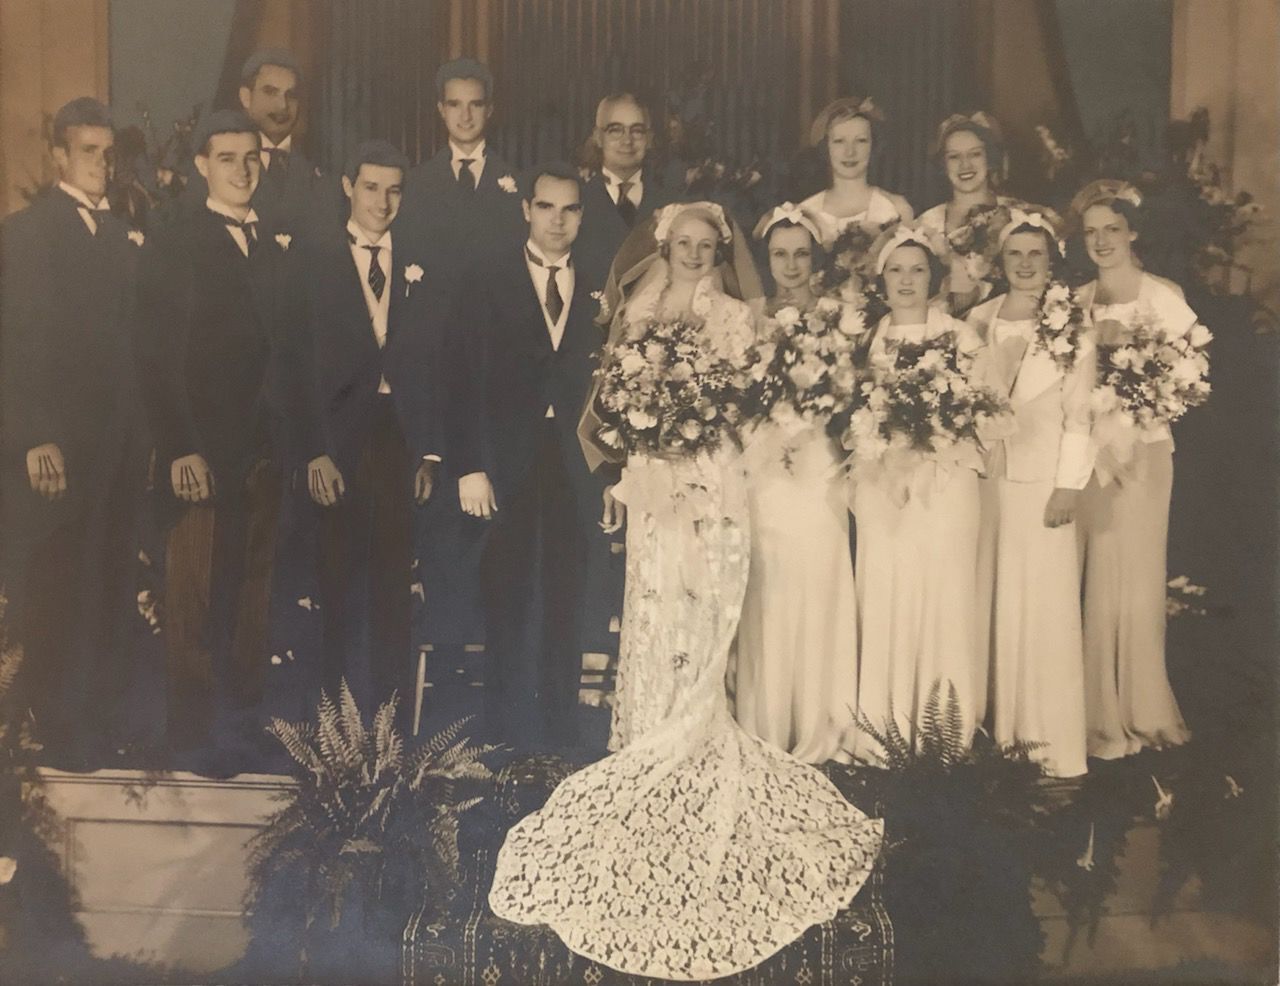 Wedding Dress Worn By 10 Brides In Family Over 50 Years